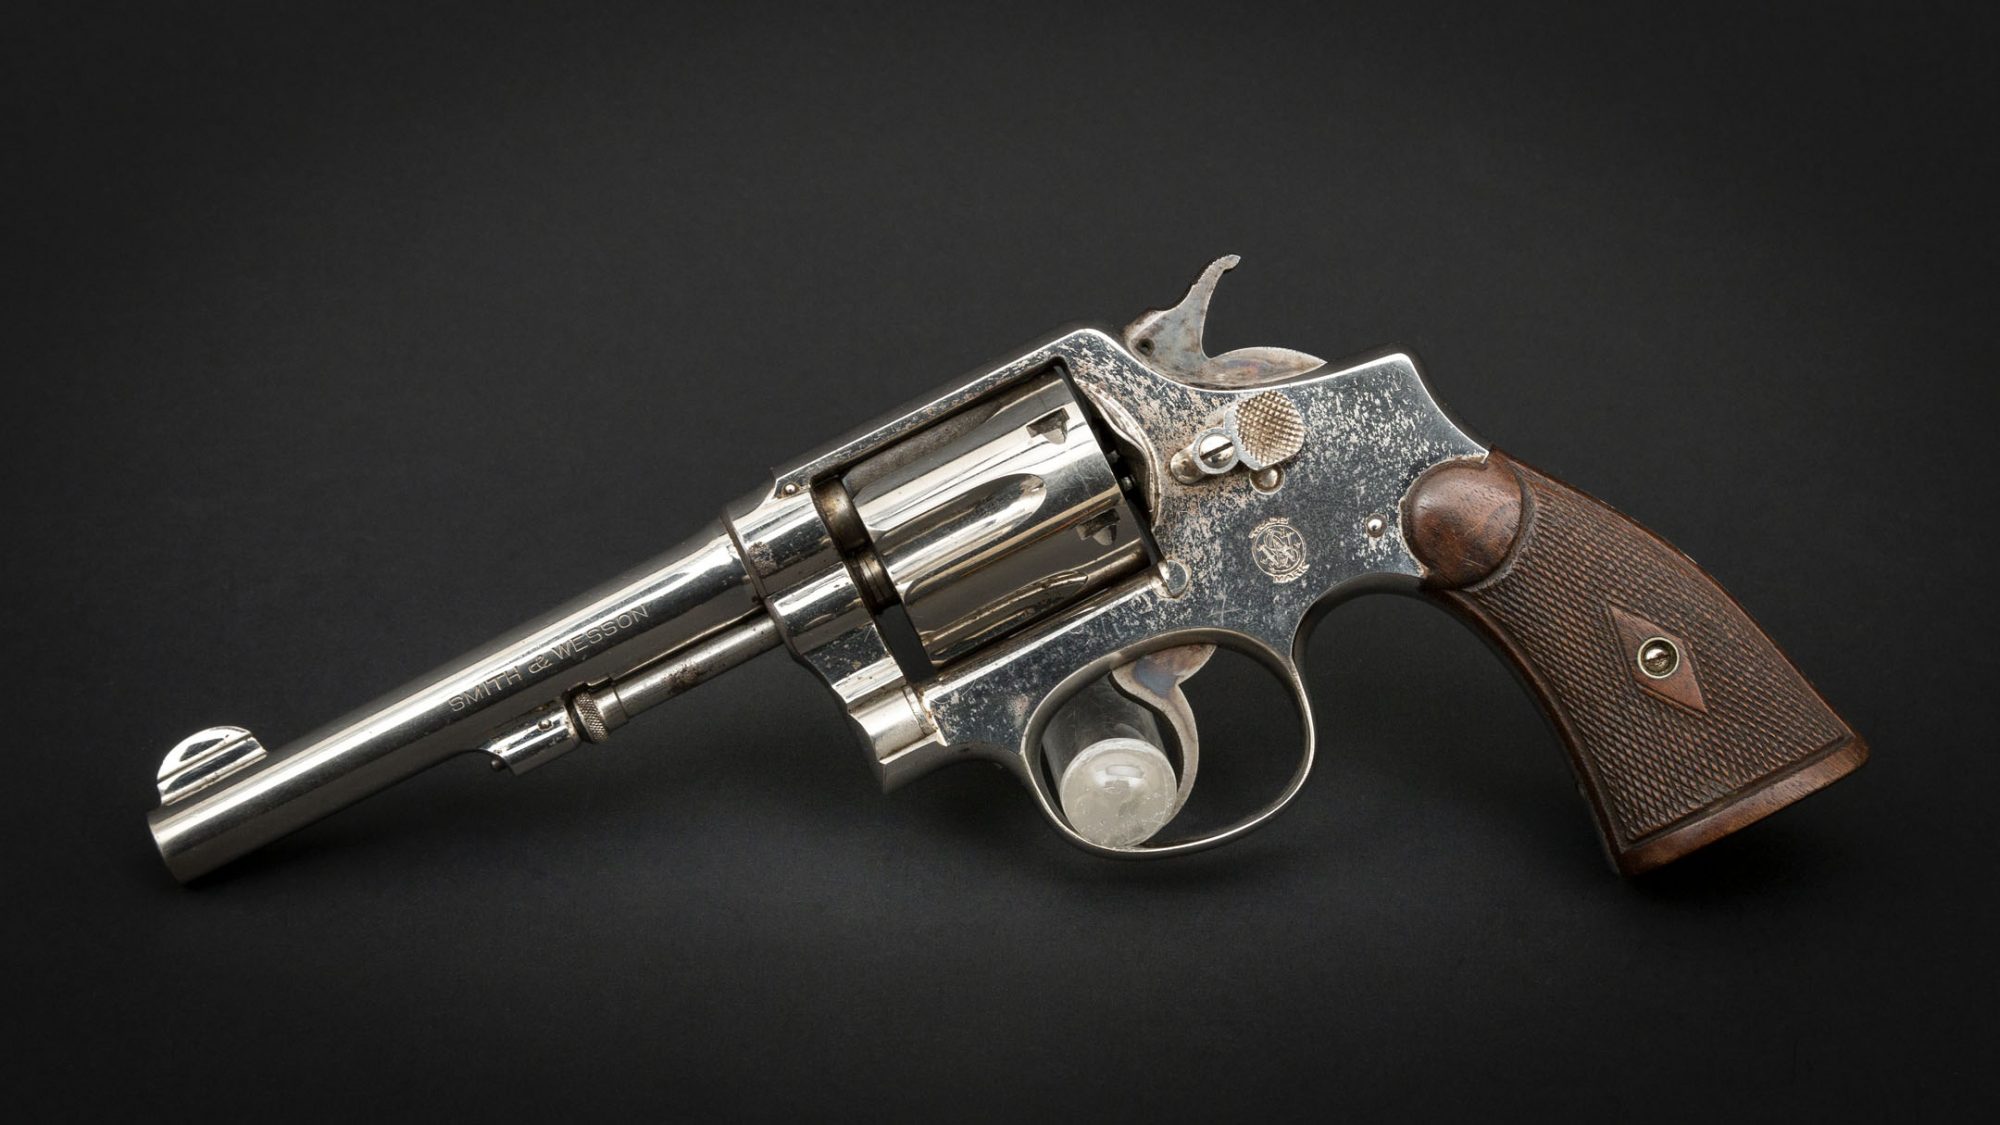 Smith and Wesson 32-20 Hand Ejector Model 1905, for sale by Turnbull Restoration Co. of Bloomfield, NY